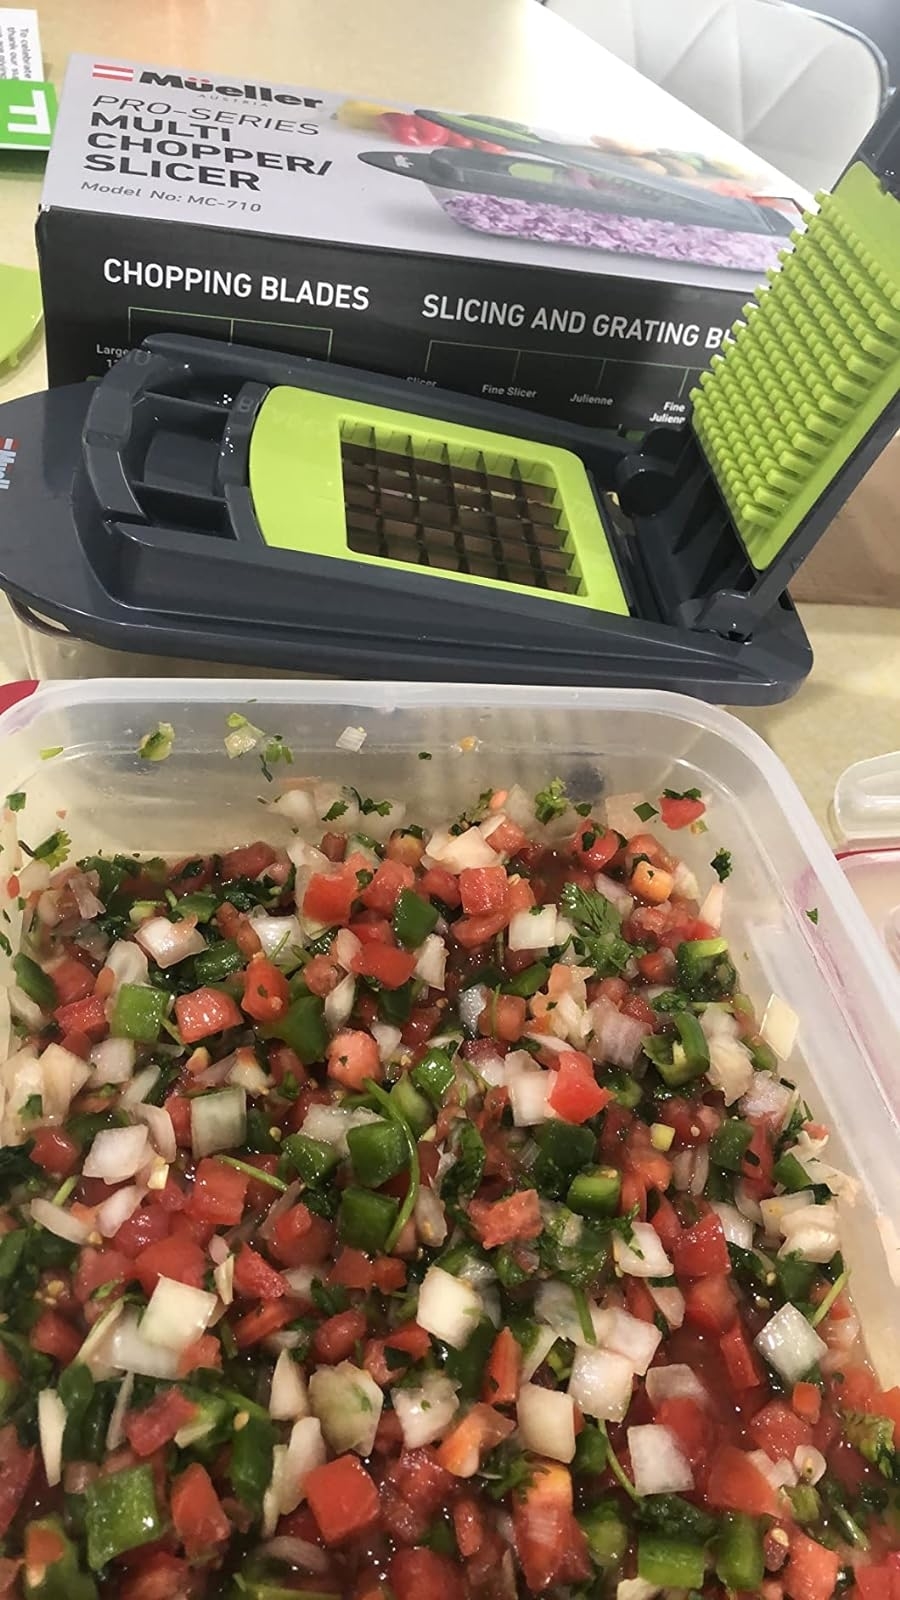 A reviewer&#x27;s chopper next to a container filled with chopped veggies